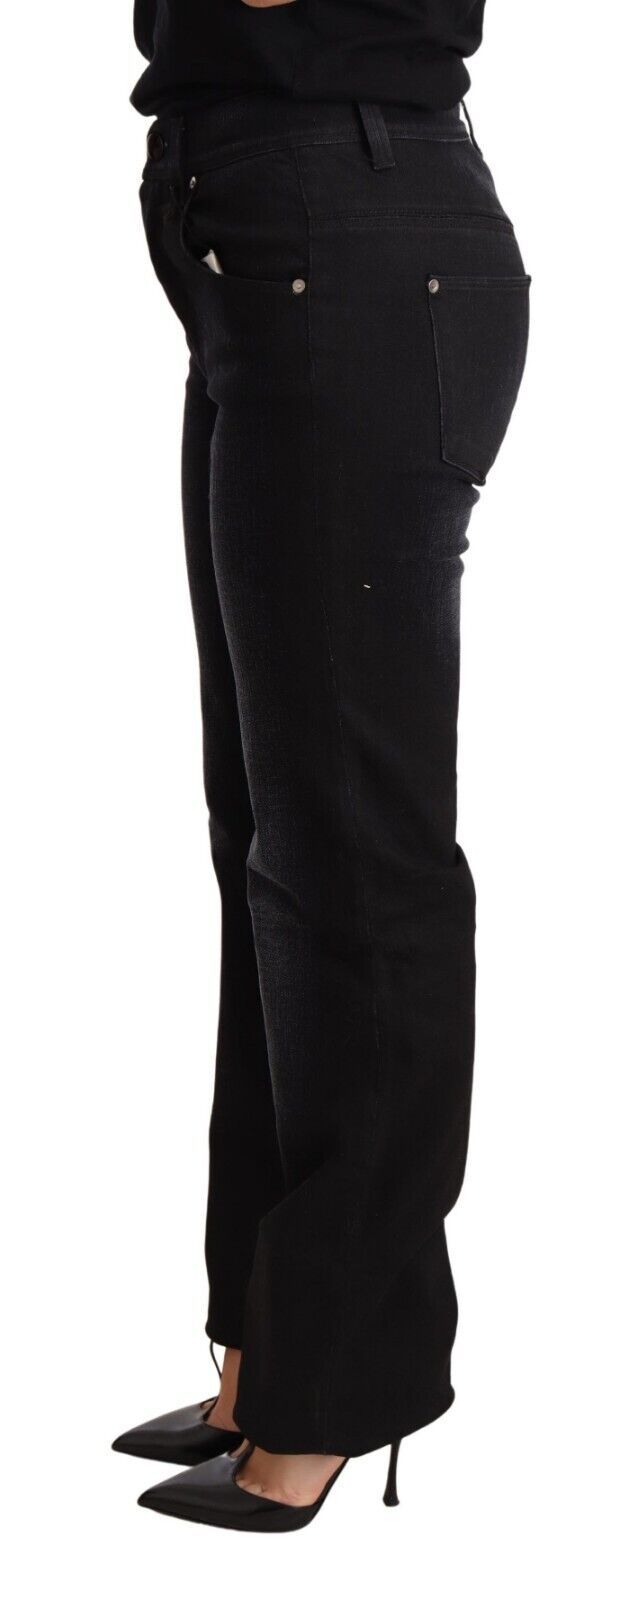 Ermanno Scervino Chic Black Washed Straight Cut Jeans